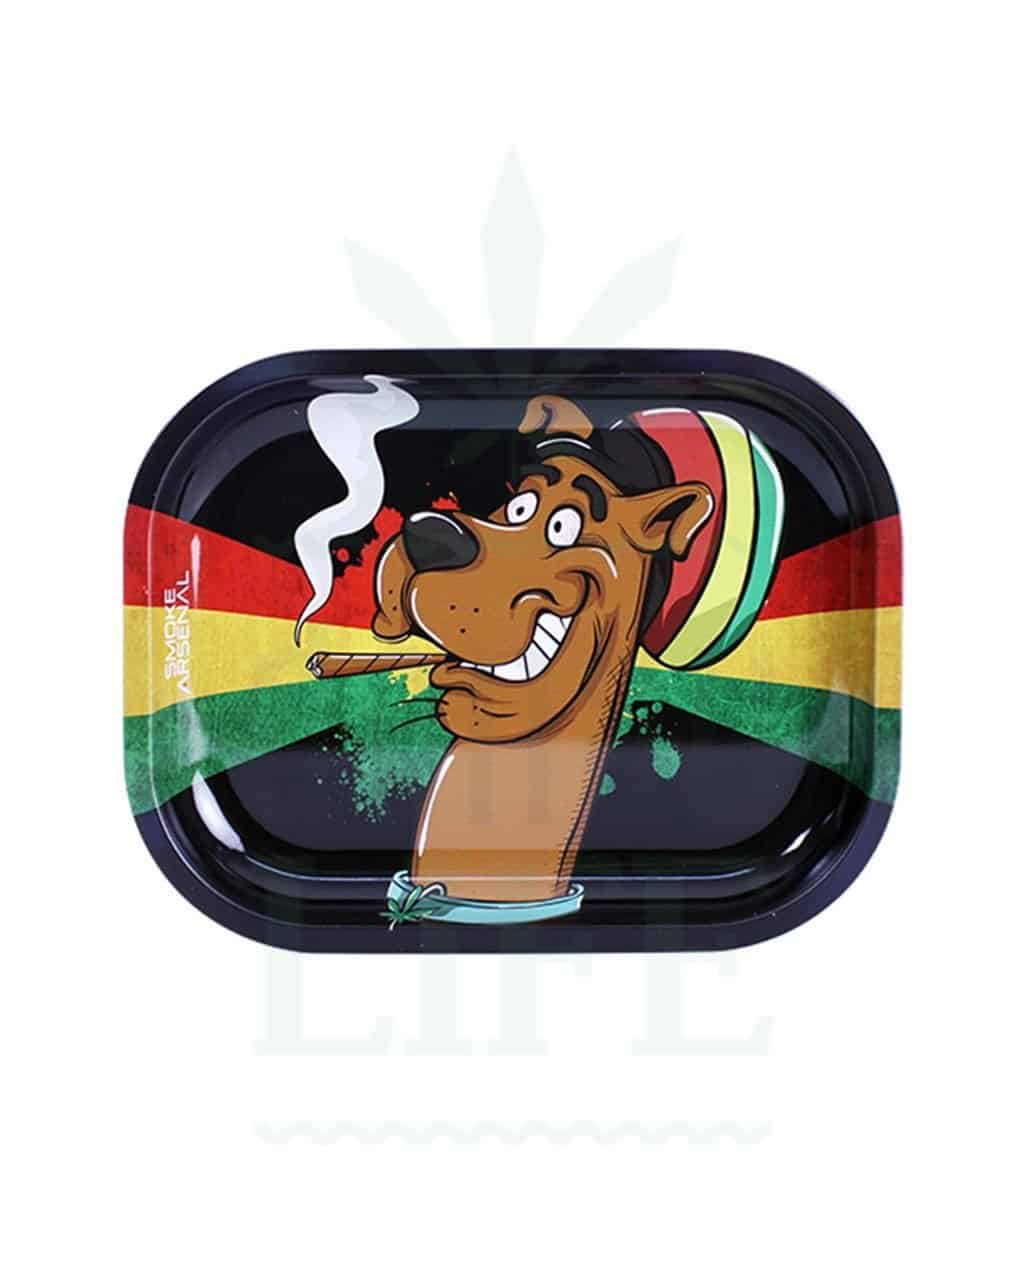 Mischschalen SMOKE ARSENAL Rolling Tray | ‚Dabs dabs dabs‘